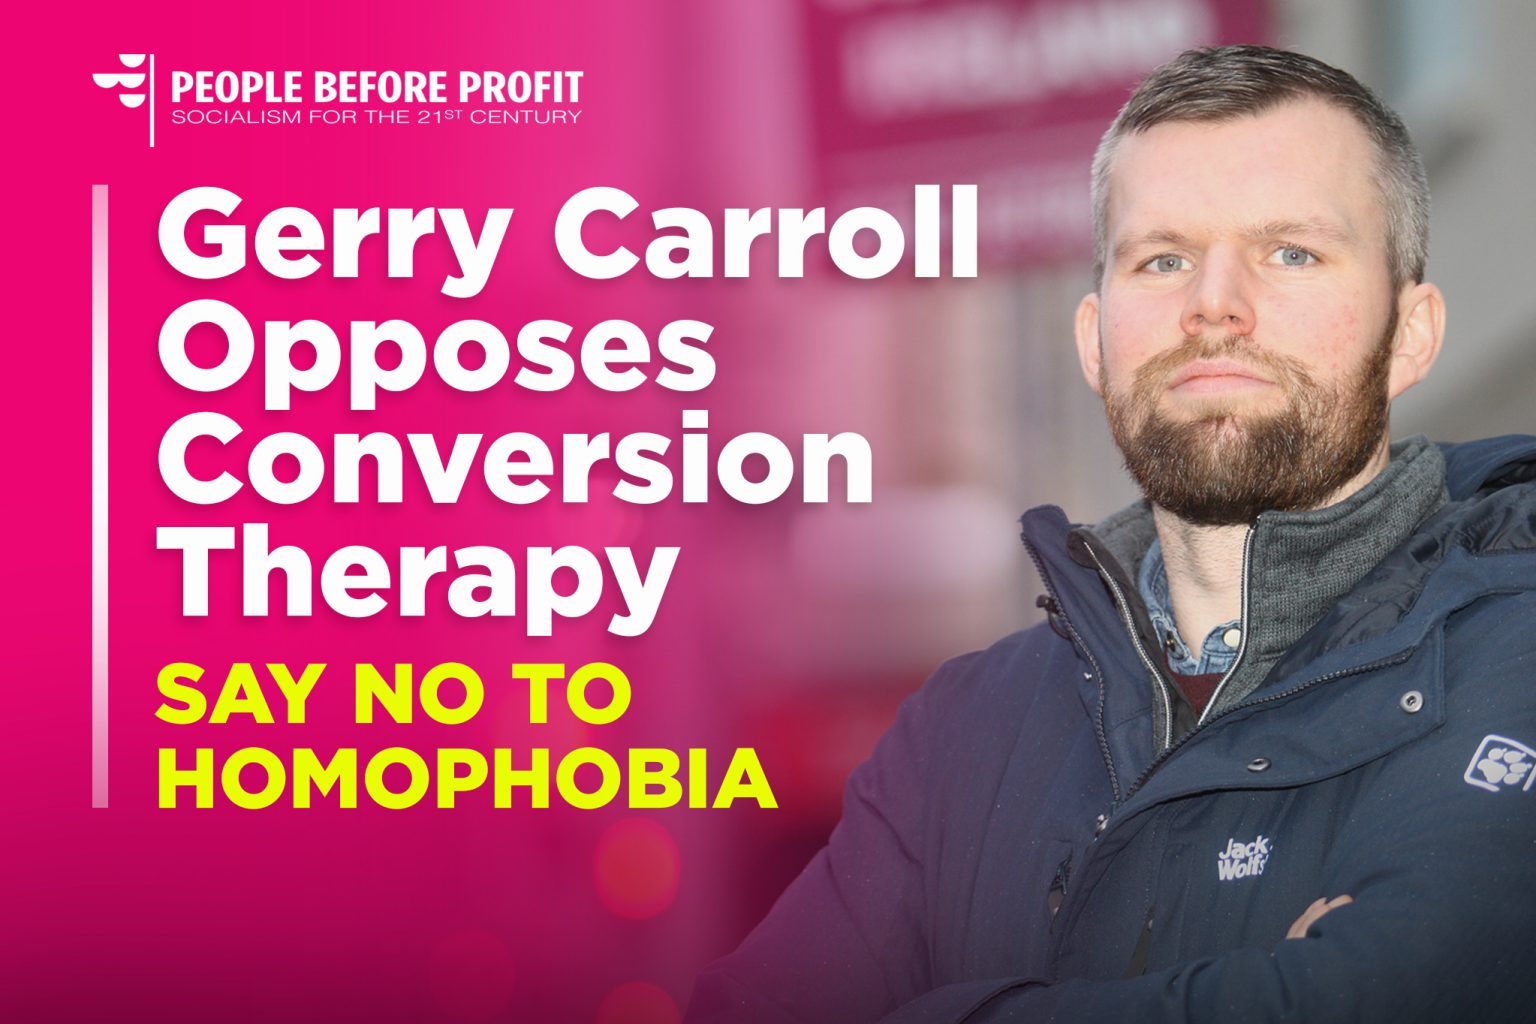 Carroll “We Should Ban Conversion Therapy, And We Must Go Further